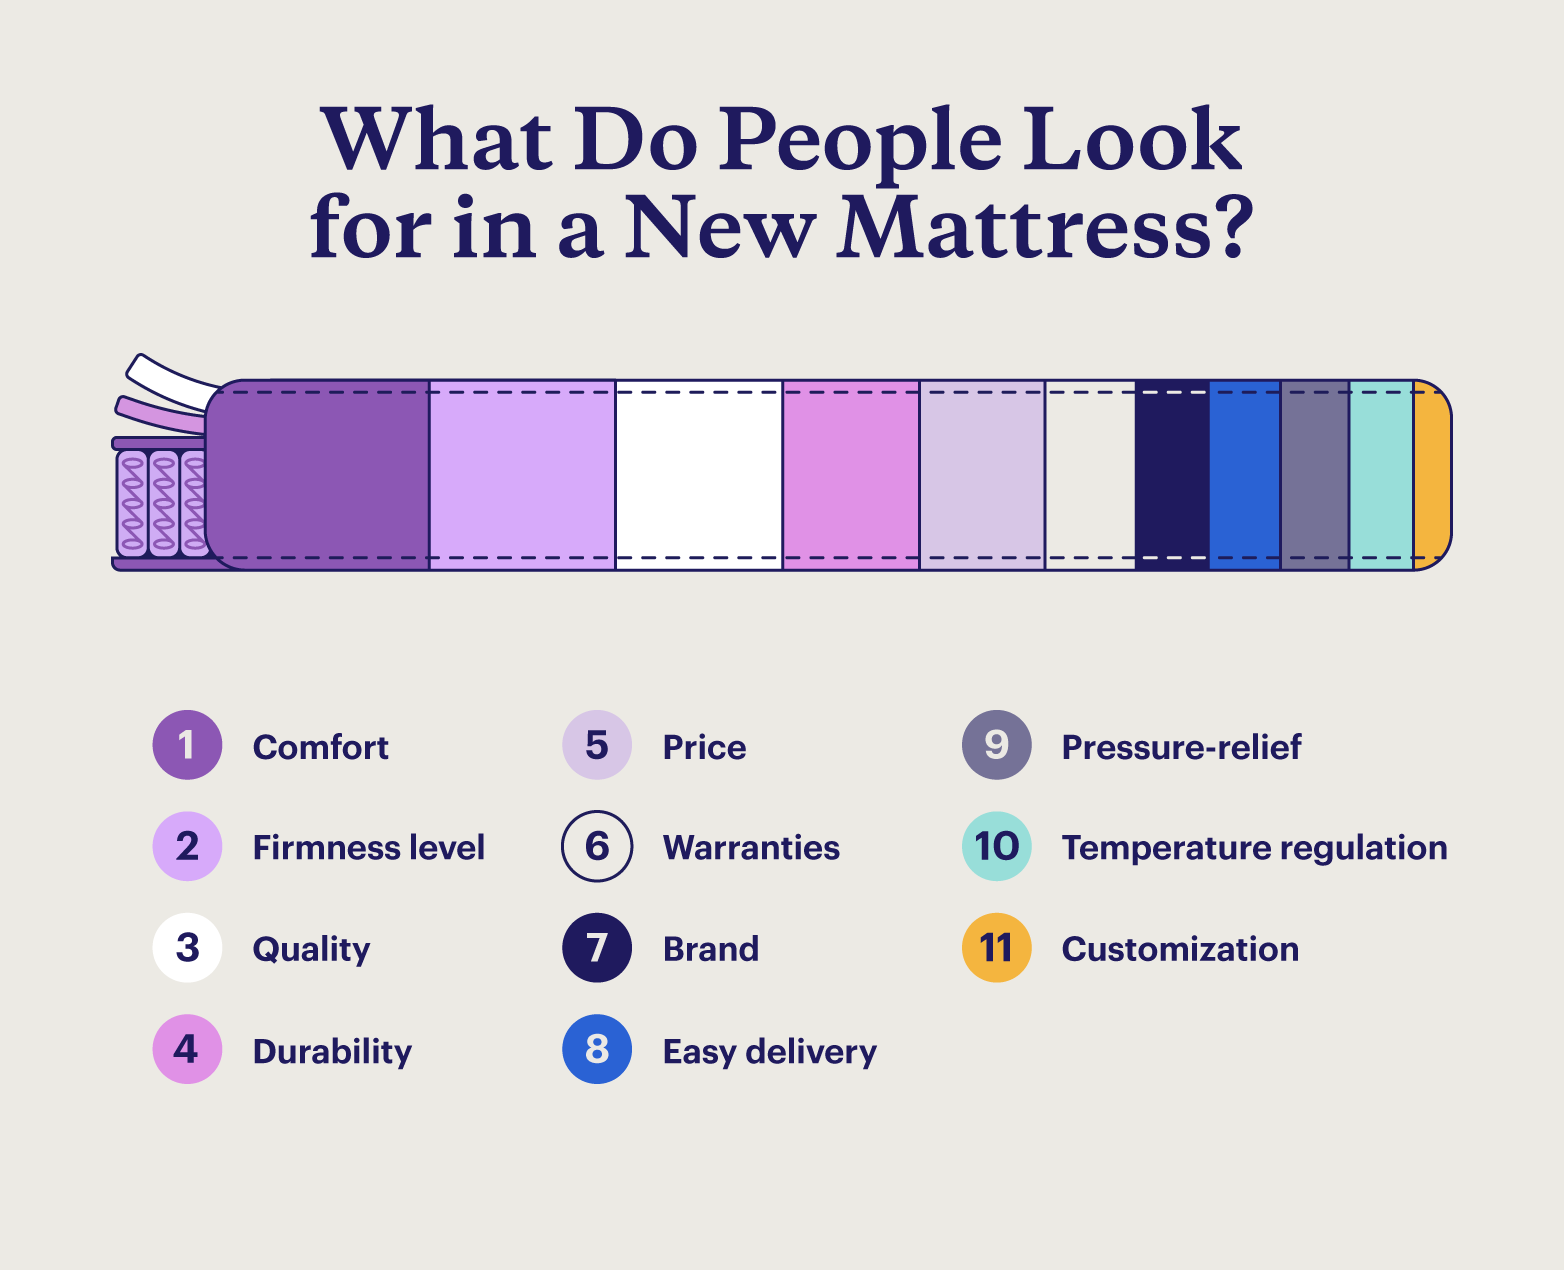 A stacked bar chart shaped like a mattress highlights the facts about sleep regarding mattress feature preferences.